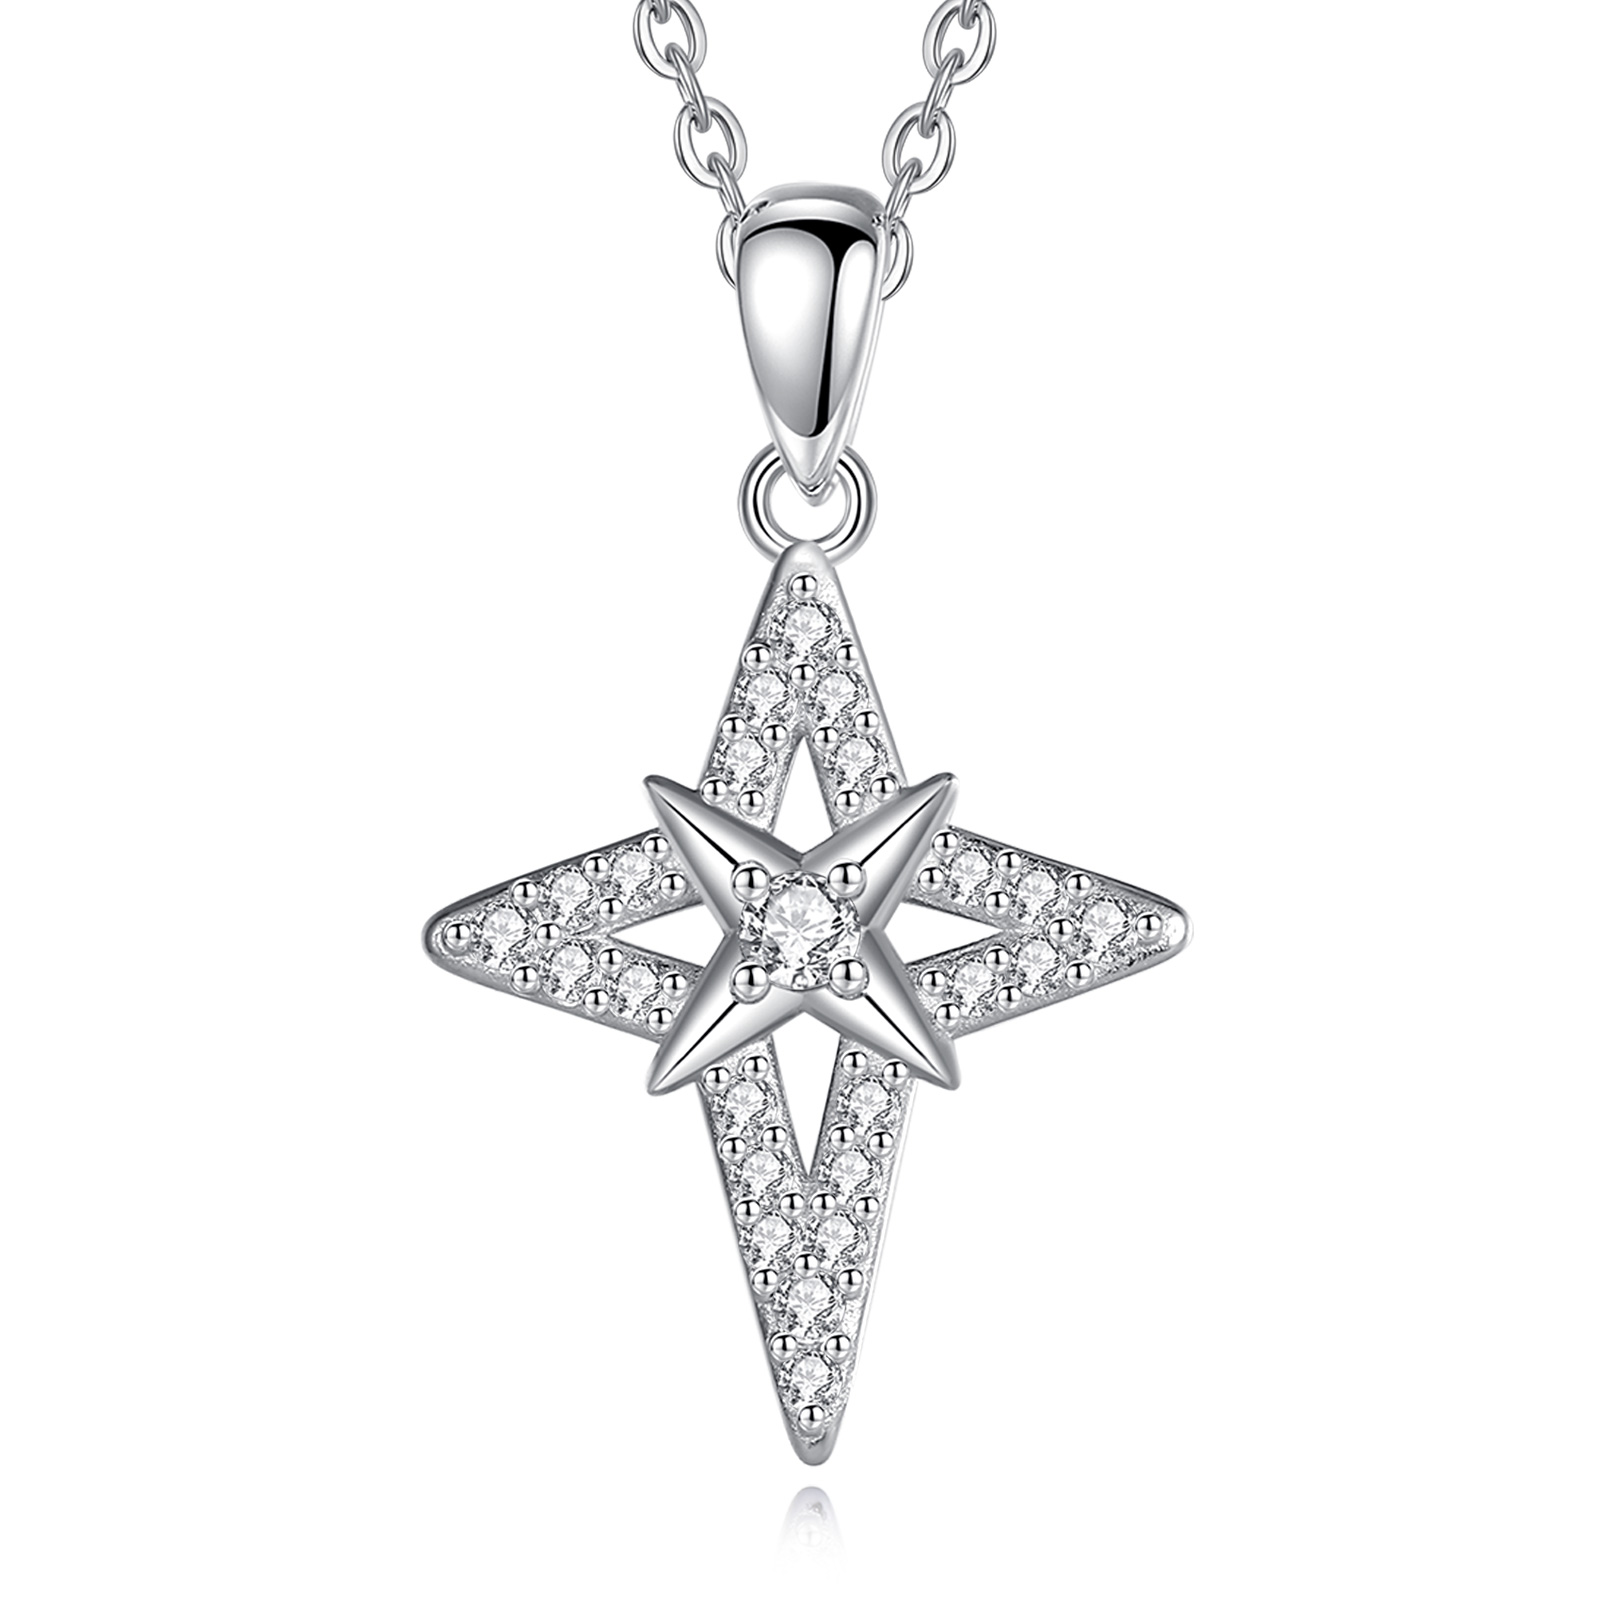 Merryshine Jewelry 925 Sterling Silver North Star Cross Pendant Necklace with Cubic Zirconia